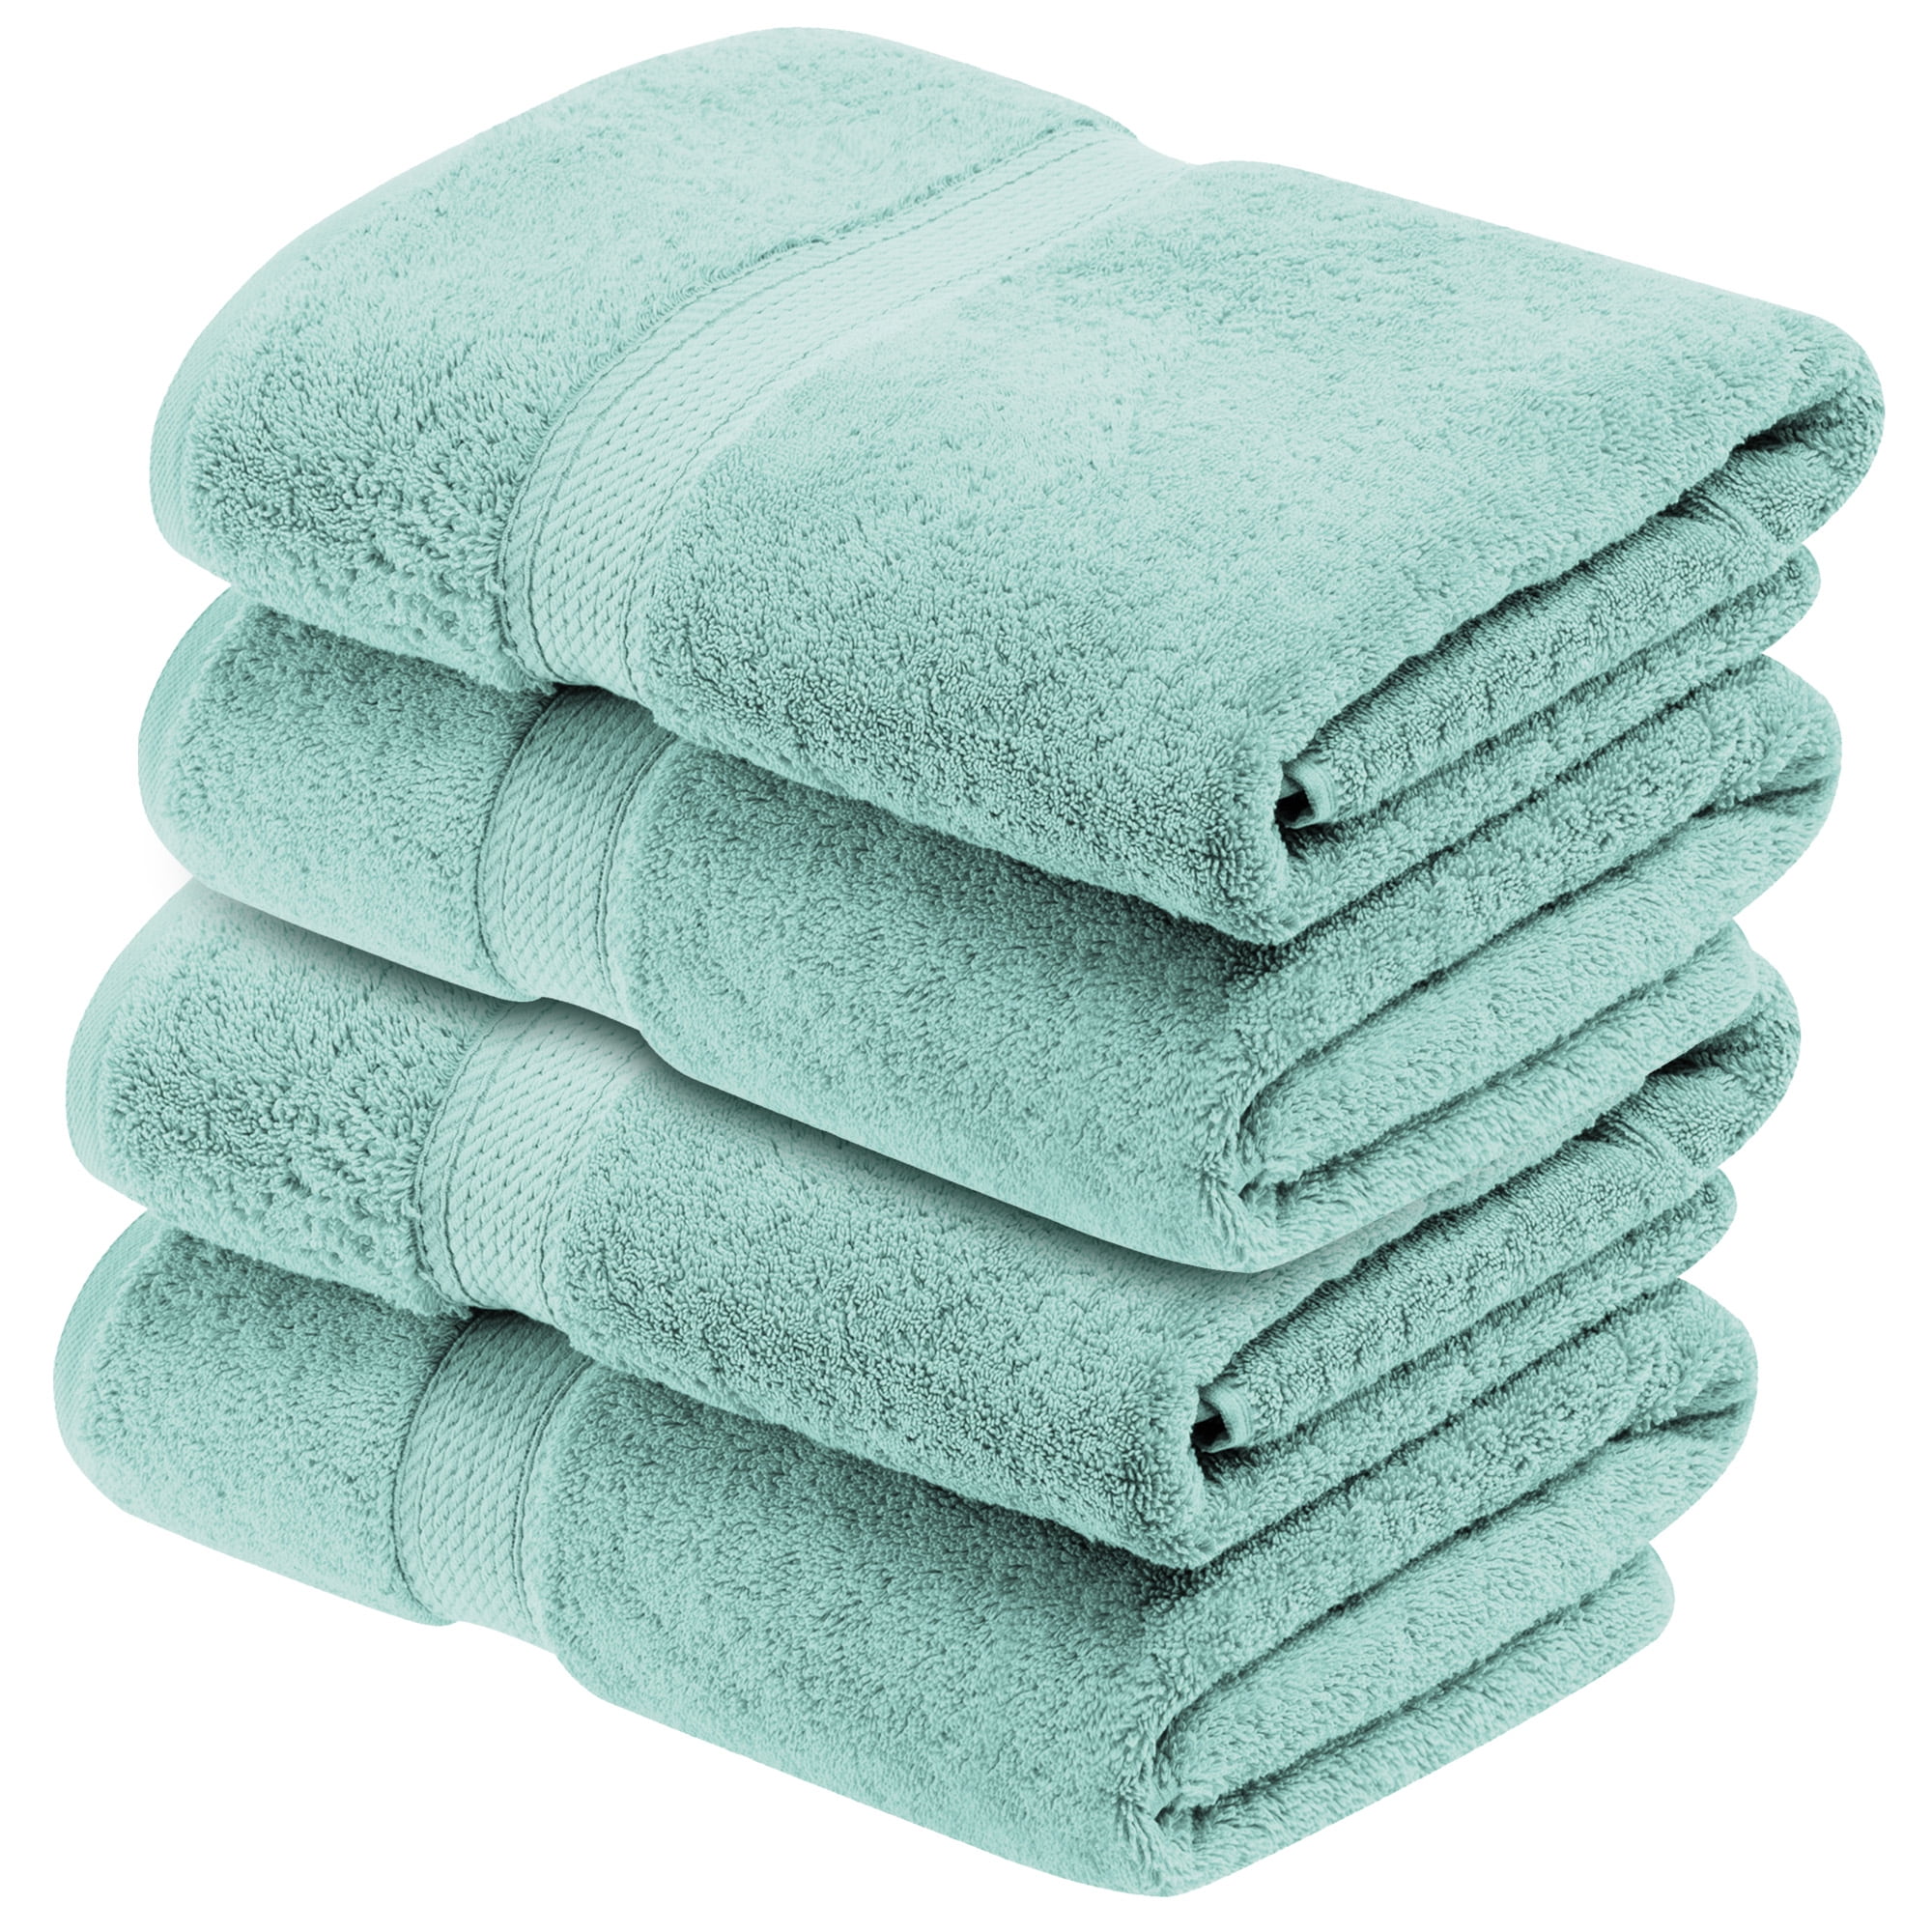 Superior Egyptian Cotton 800 GSM Bath Towel Set, Includes 2 Bath Towels,  Luxury Plush Essentials, Absorbent Quick Dry Towels, Guest Bathroom,  Apartment, New Home, Shower, Hotel Quality, Coral price in Saudi Arabia